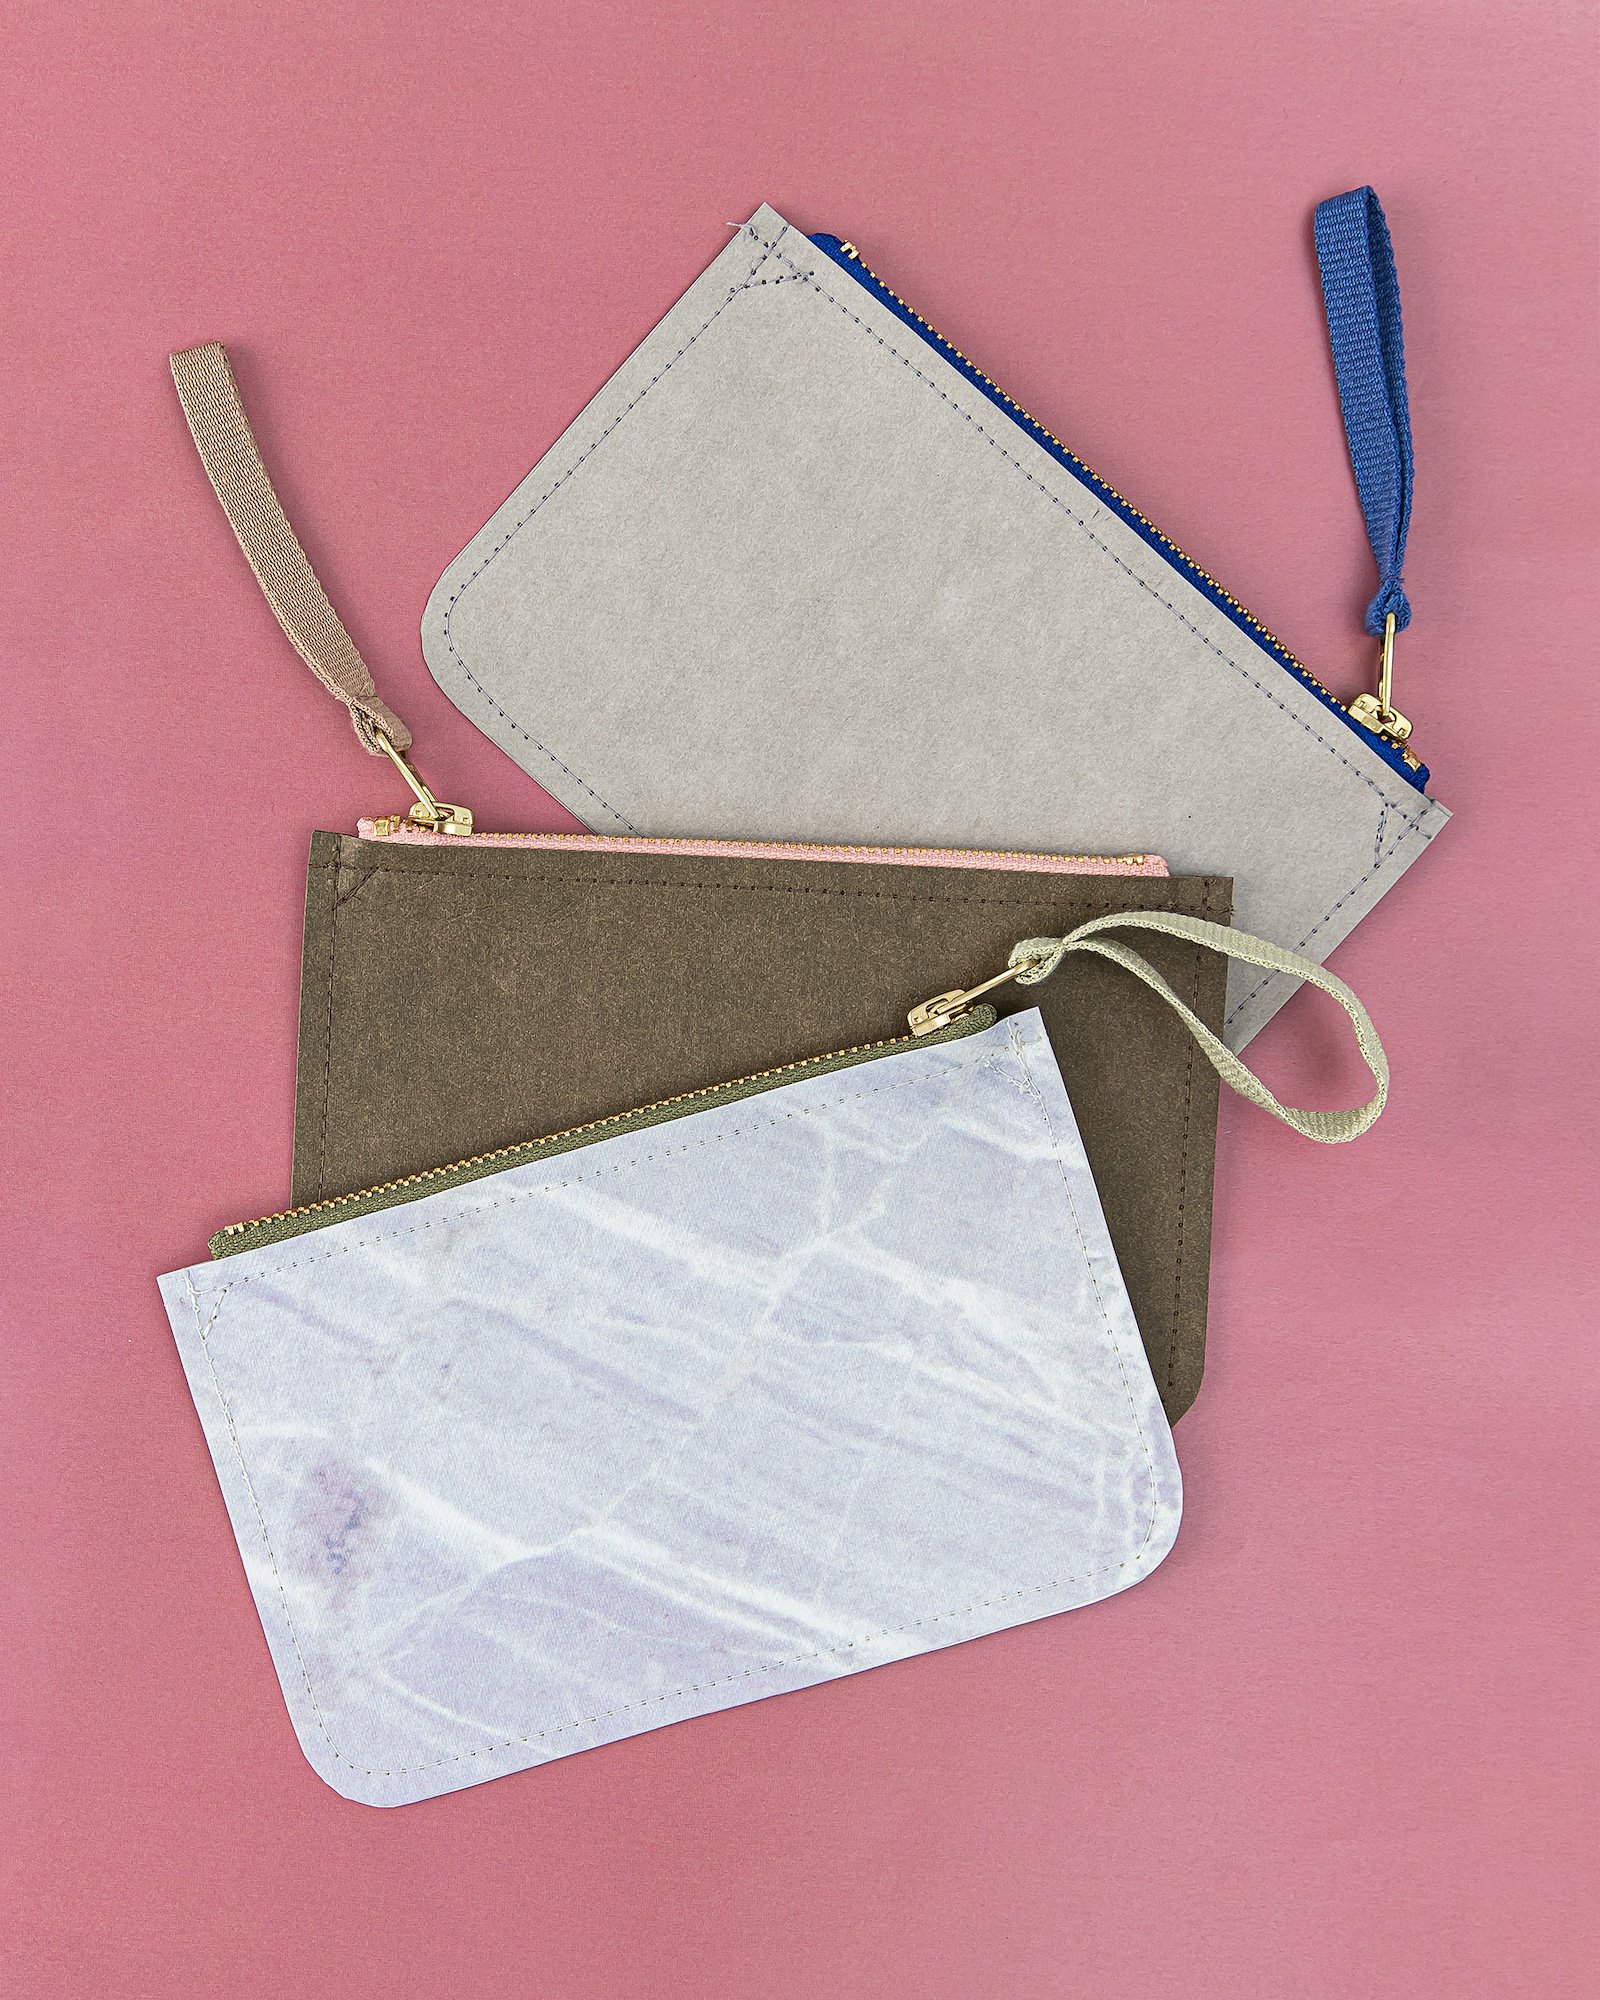 Free sewing pattern: Purse / Clutch with zip DIY7007_image.jpg